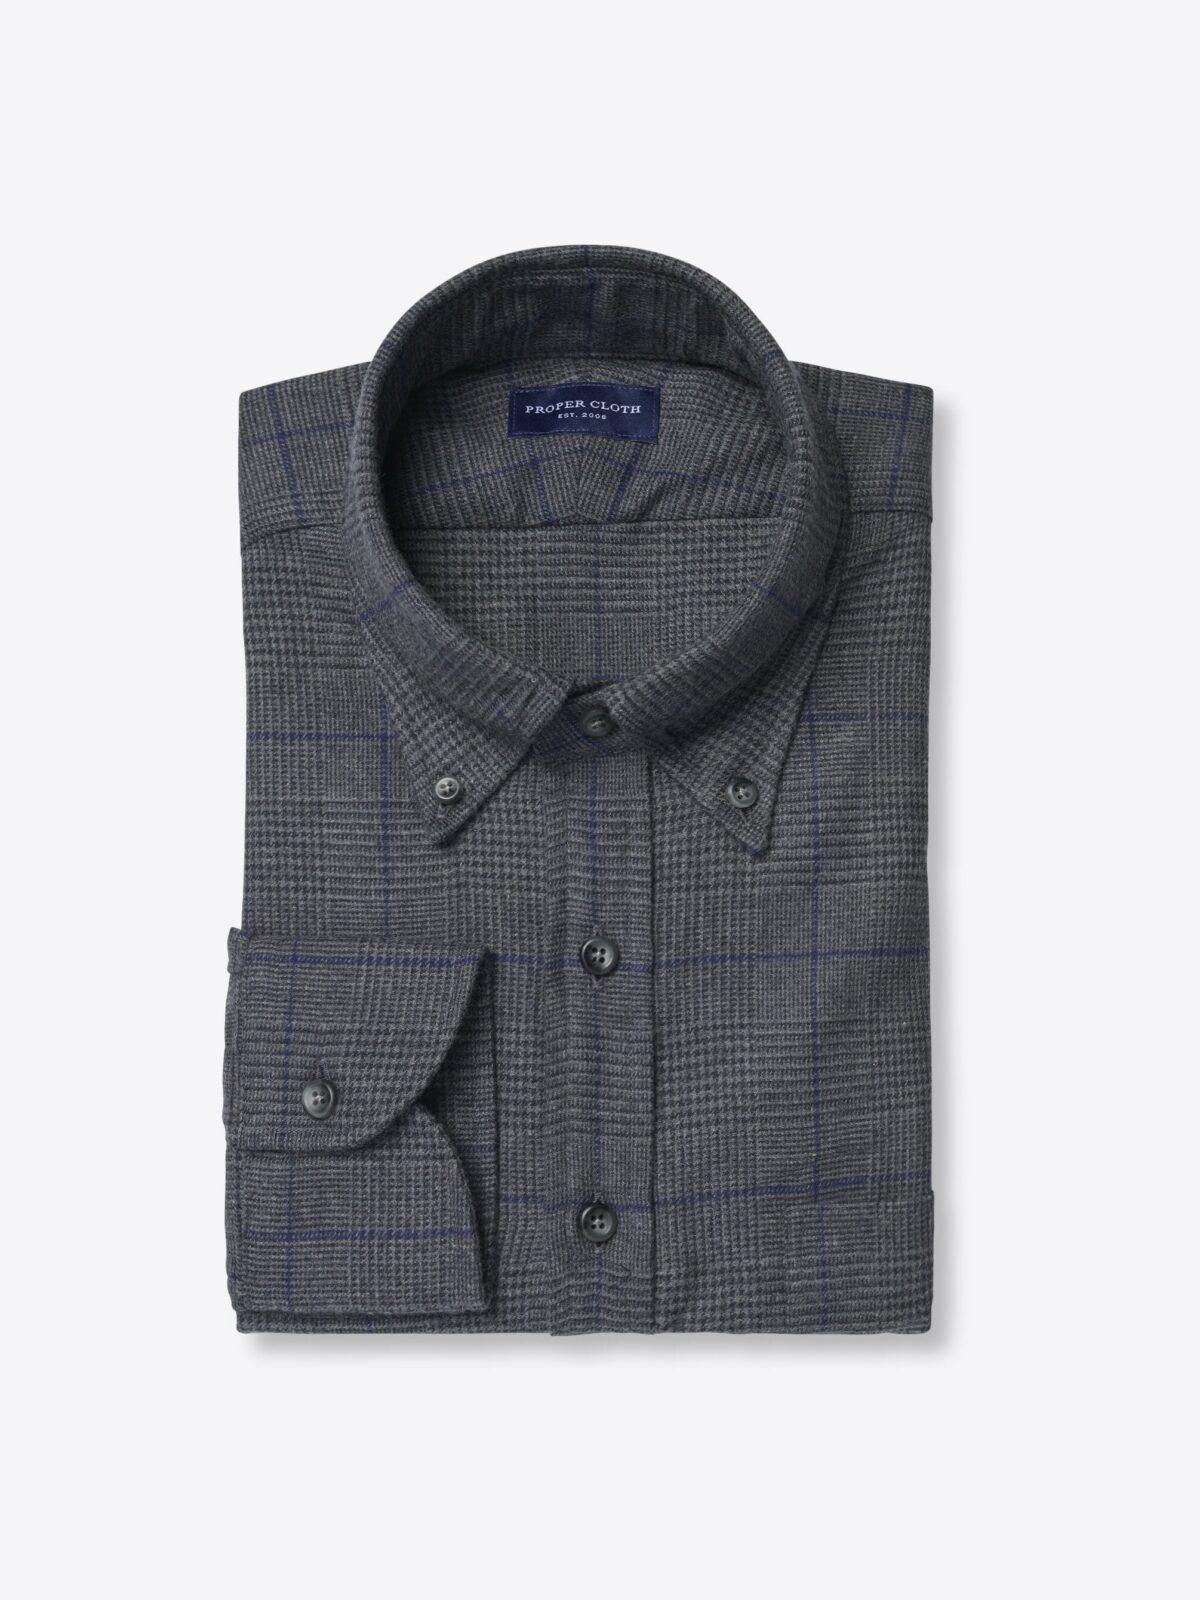 Canclini Charcoal and Royal Glen Plaid Beacon Flannel Shirt by Proper Cloth